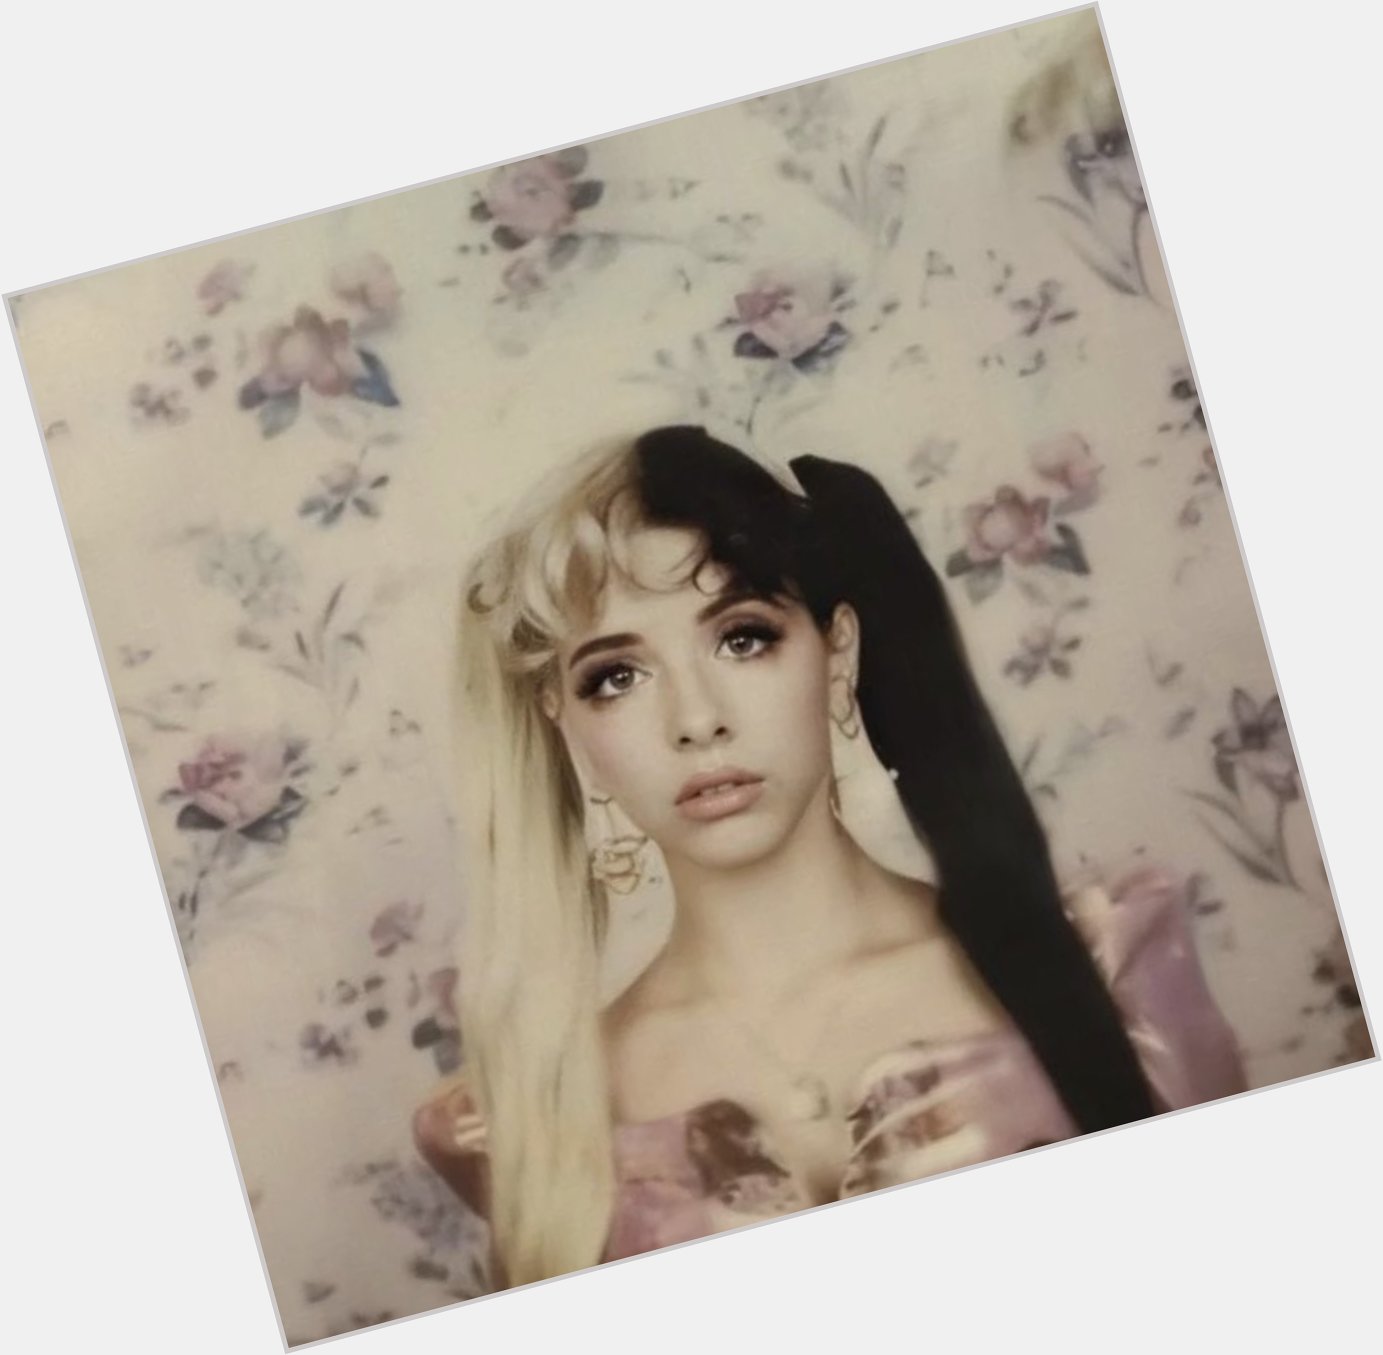 I have a friend named Melanie and she s actually obsessed with Melanie Martinez so happy birthday Melaniiiee 